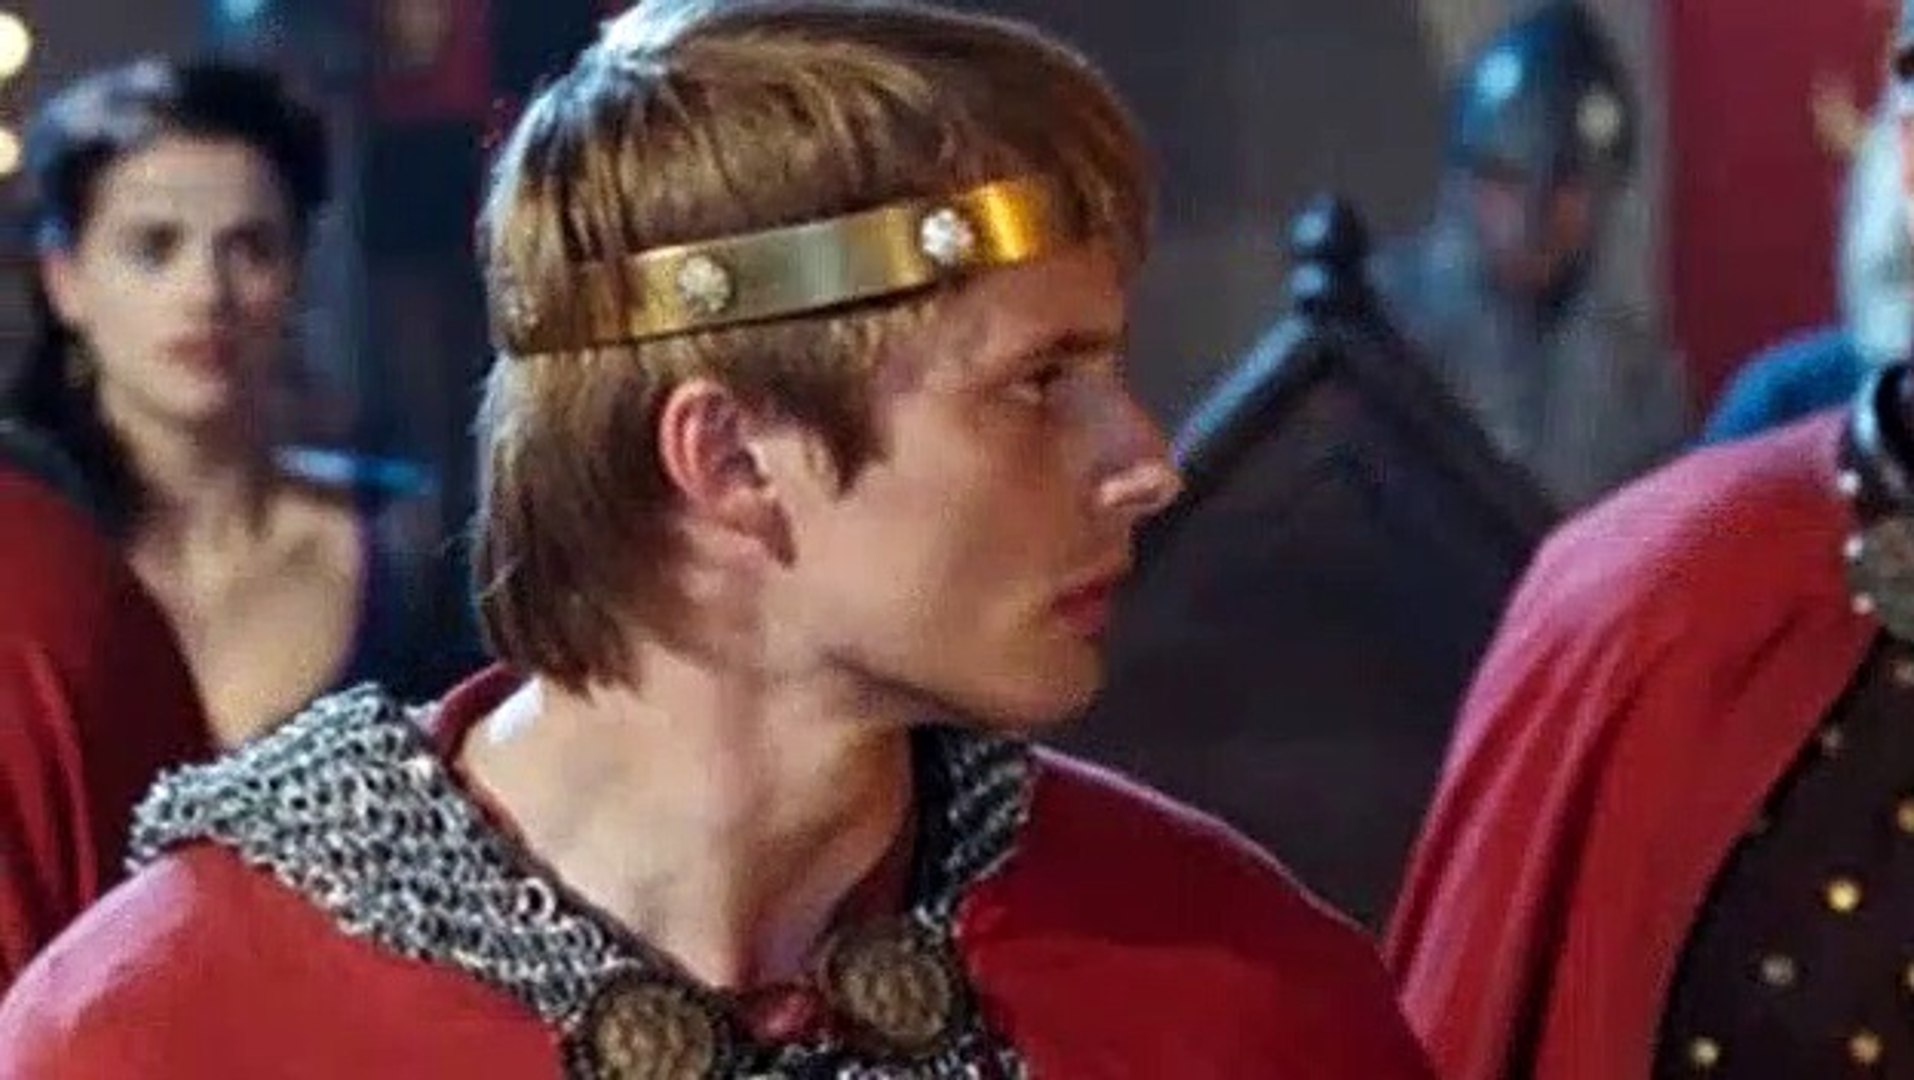 Merlin S01E09 - Excalibur - video Dailymotion